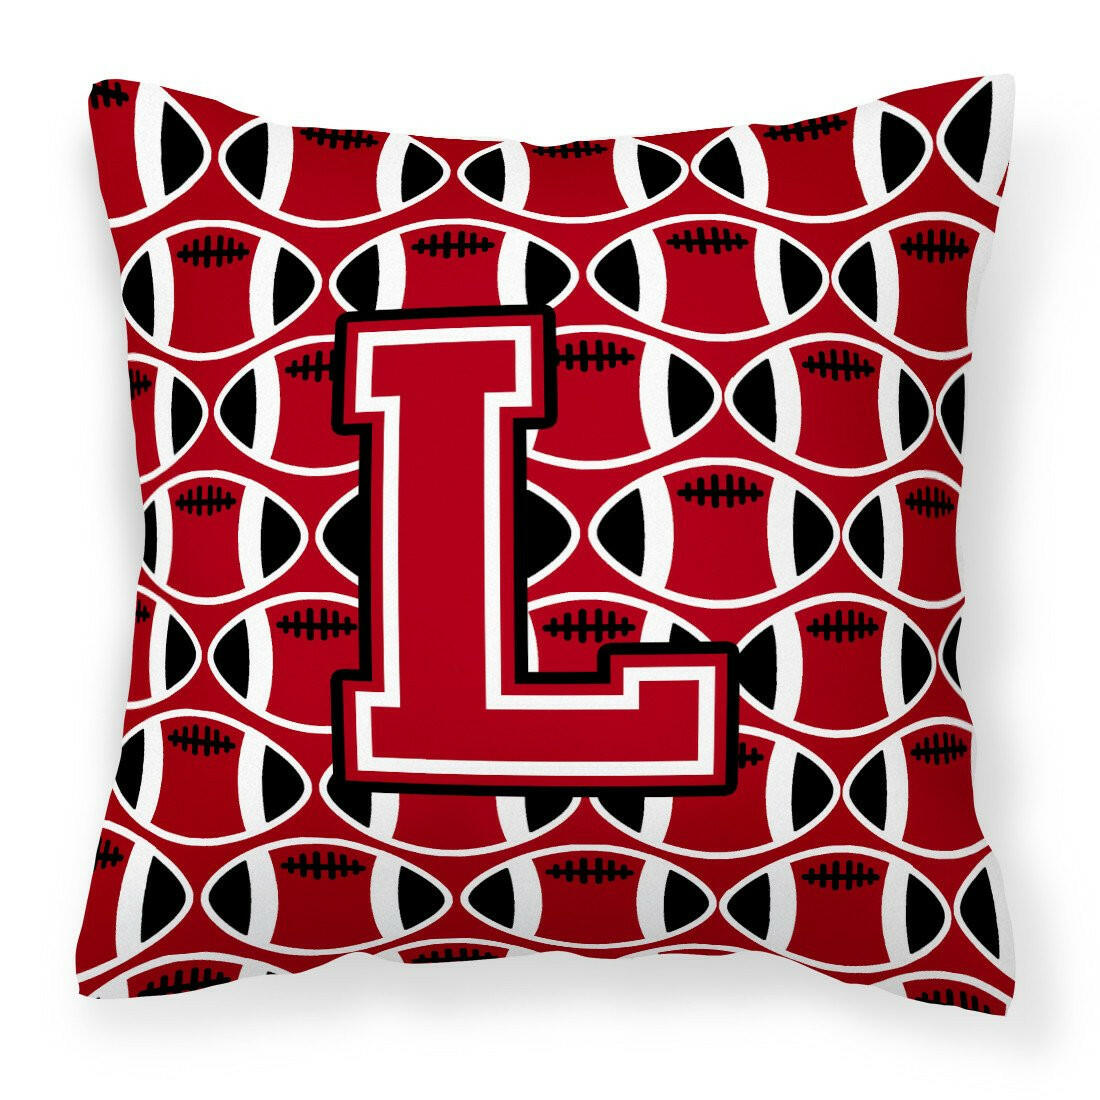 Letter L Football Red, Black and White Fabric Decorative Pillow CJ1073-LPW1414 by Caroline's Treasures